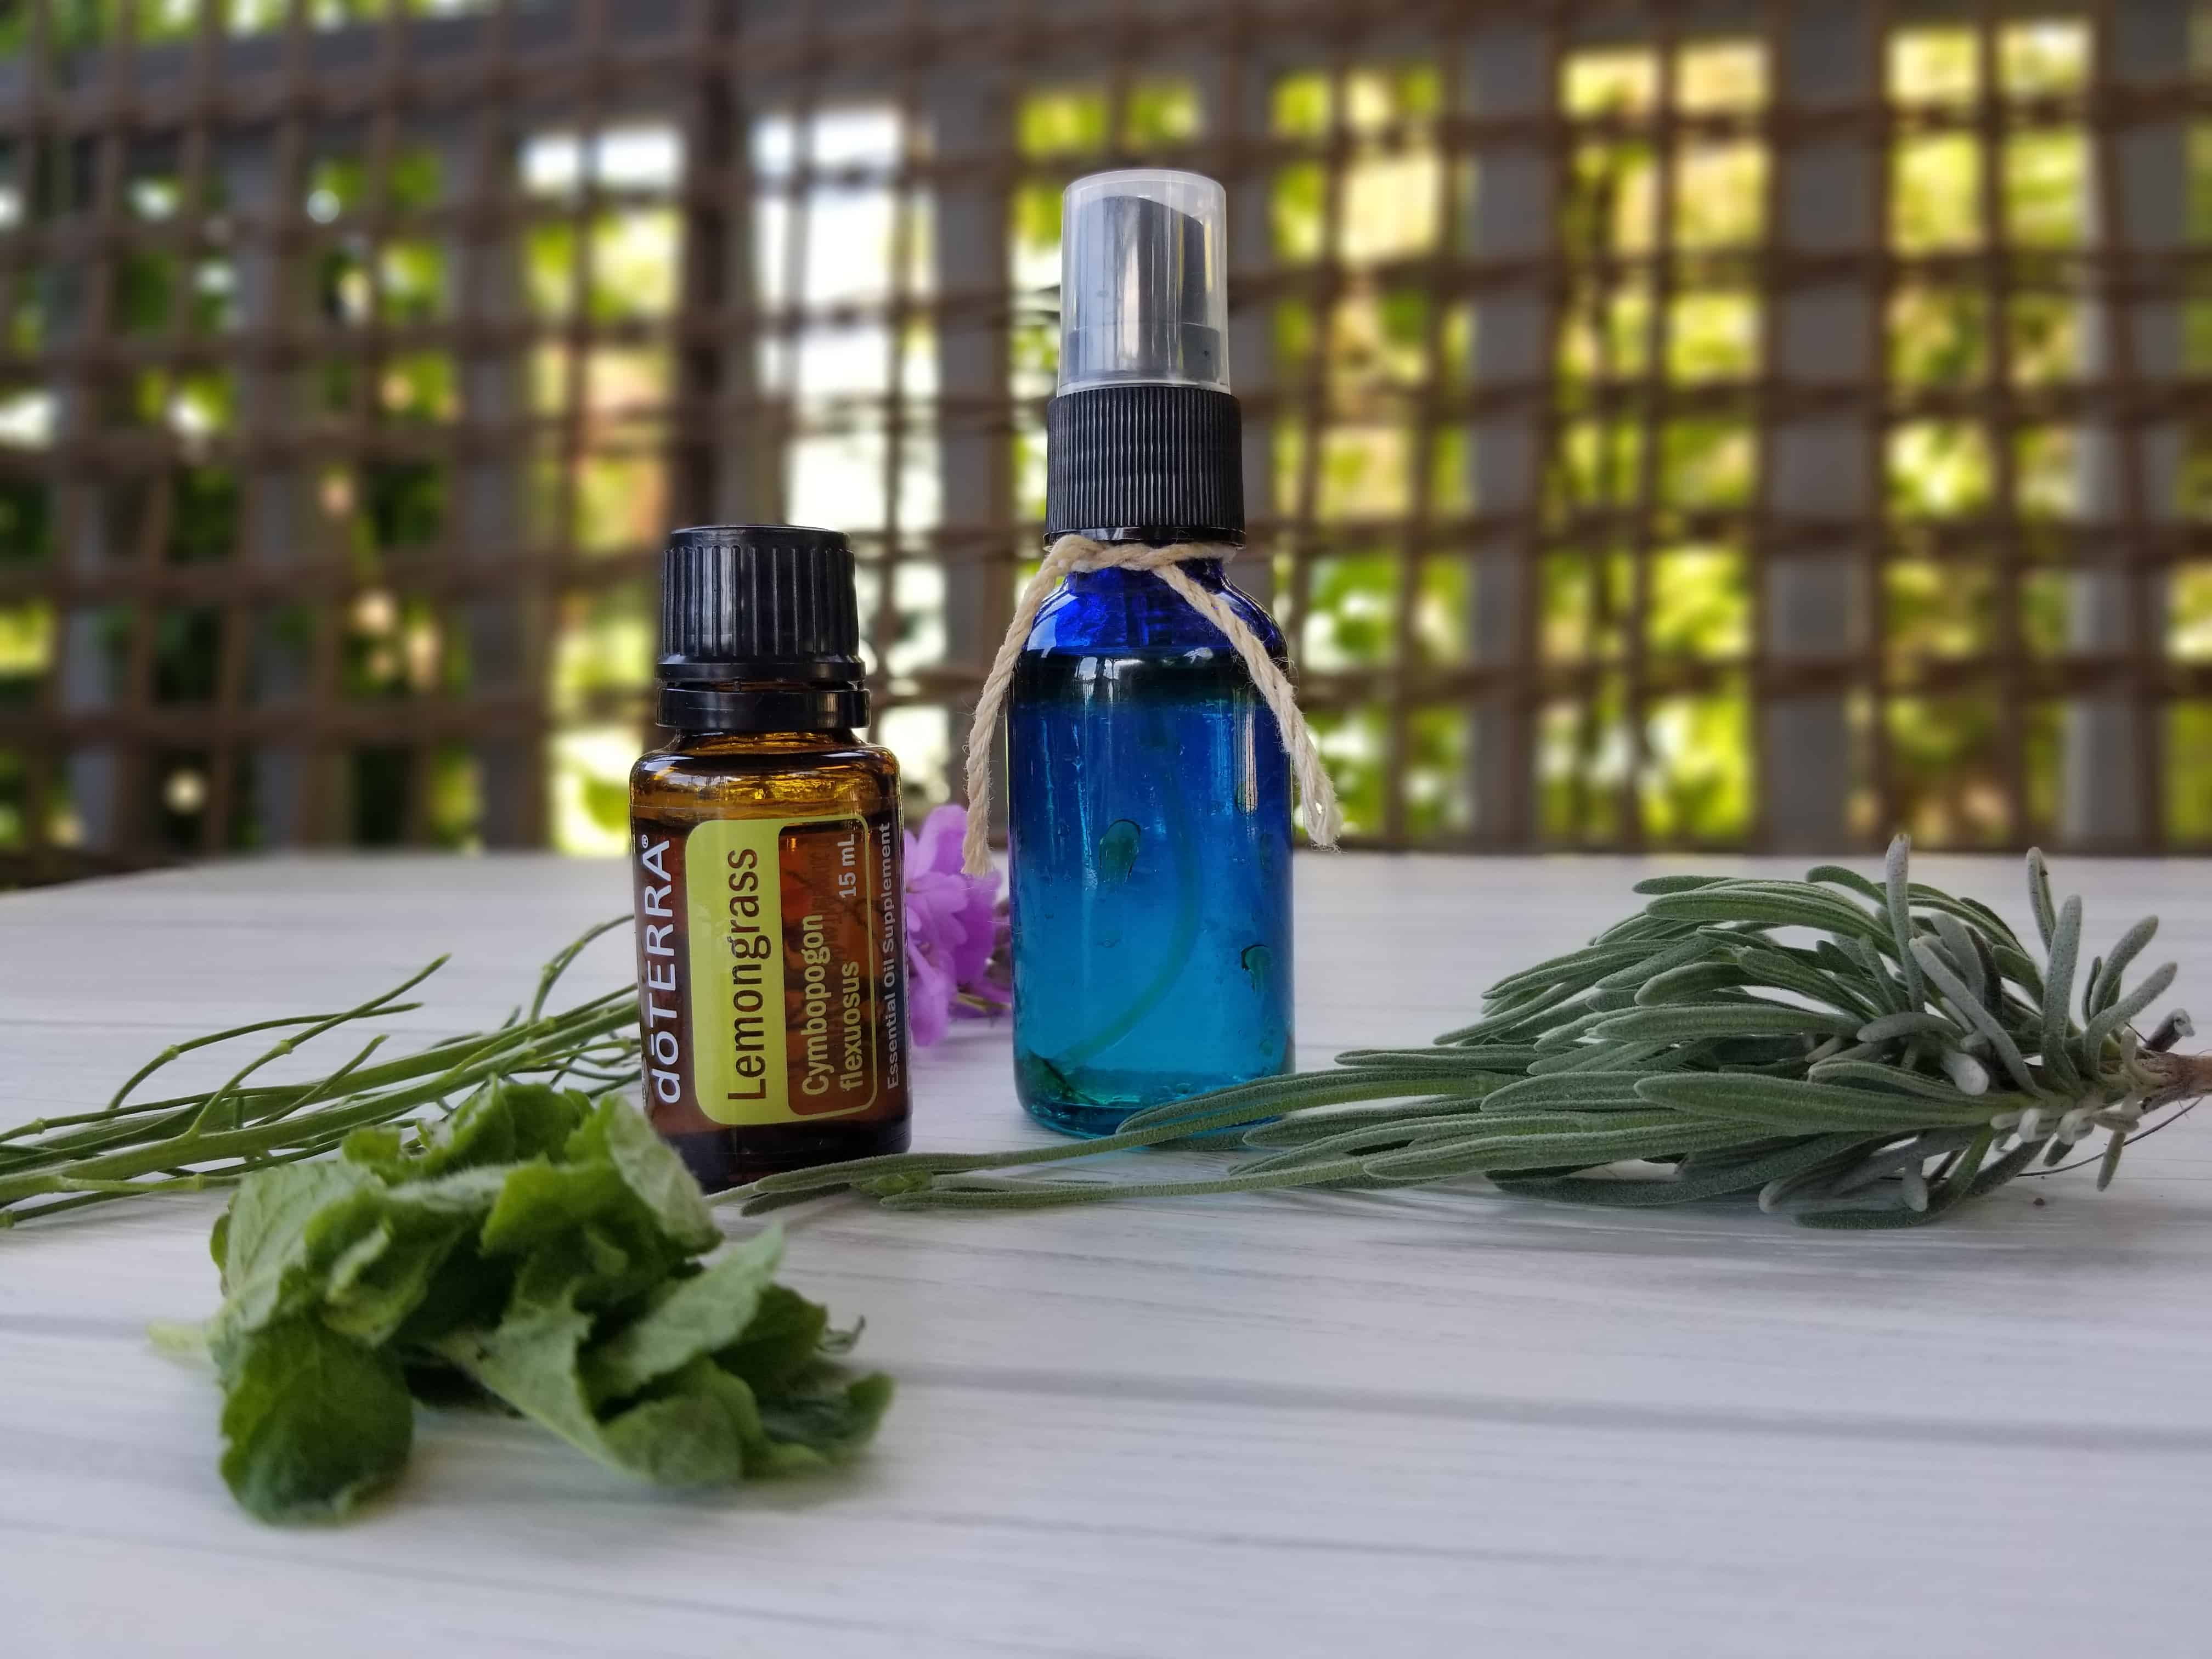 blue spray bottle with essential oil mosquito repellent, lemongrass essential oil bottle and greenery